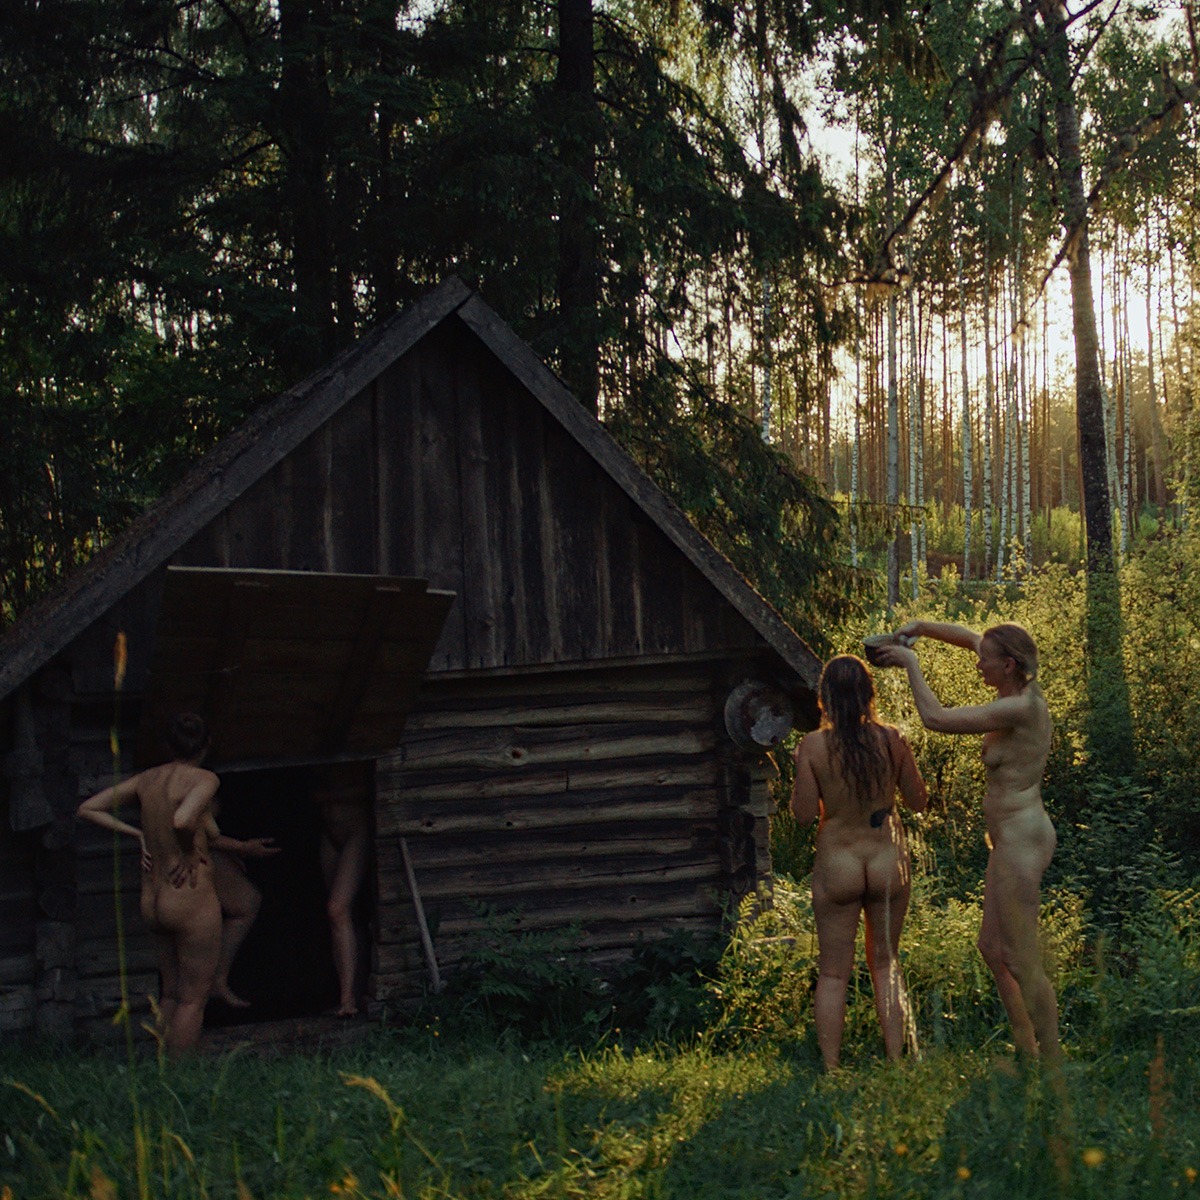 a group of naked woman stand by a wooden hut in a forest.